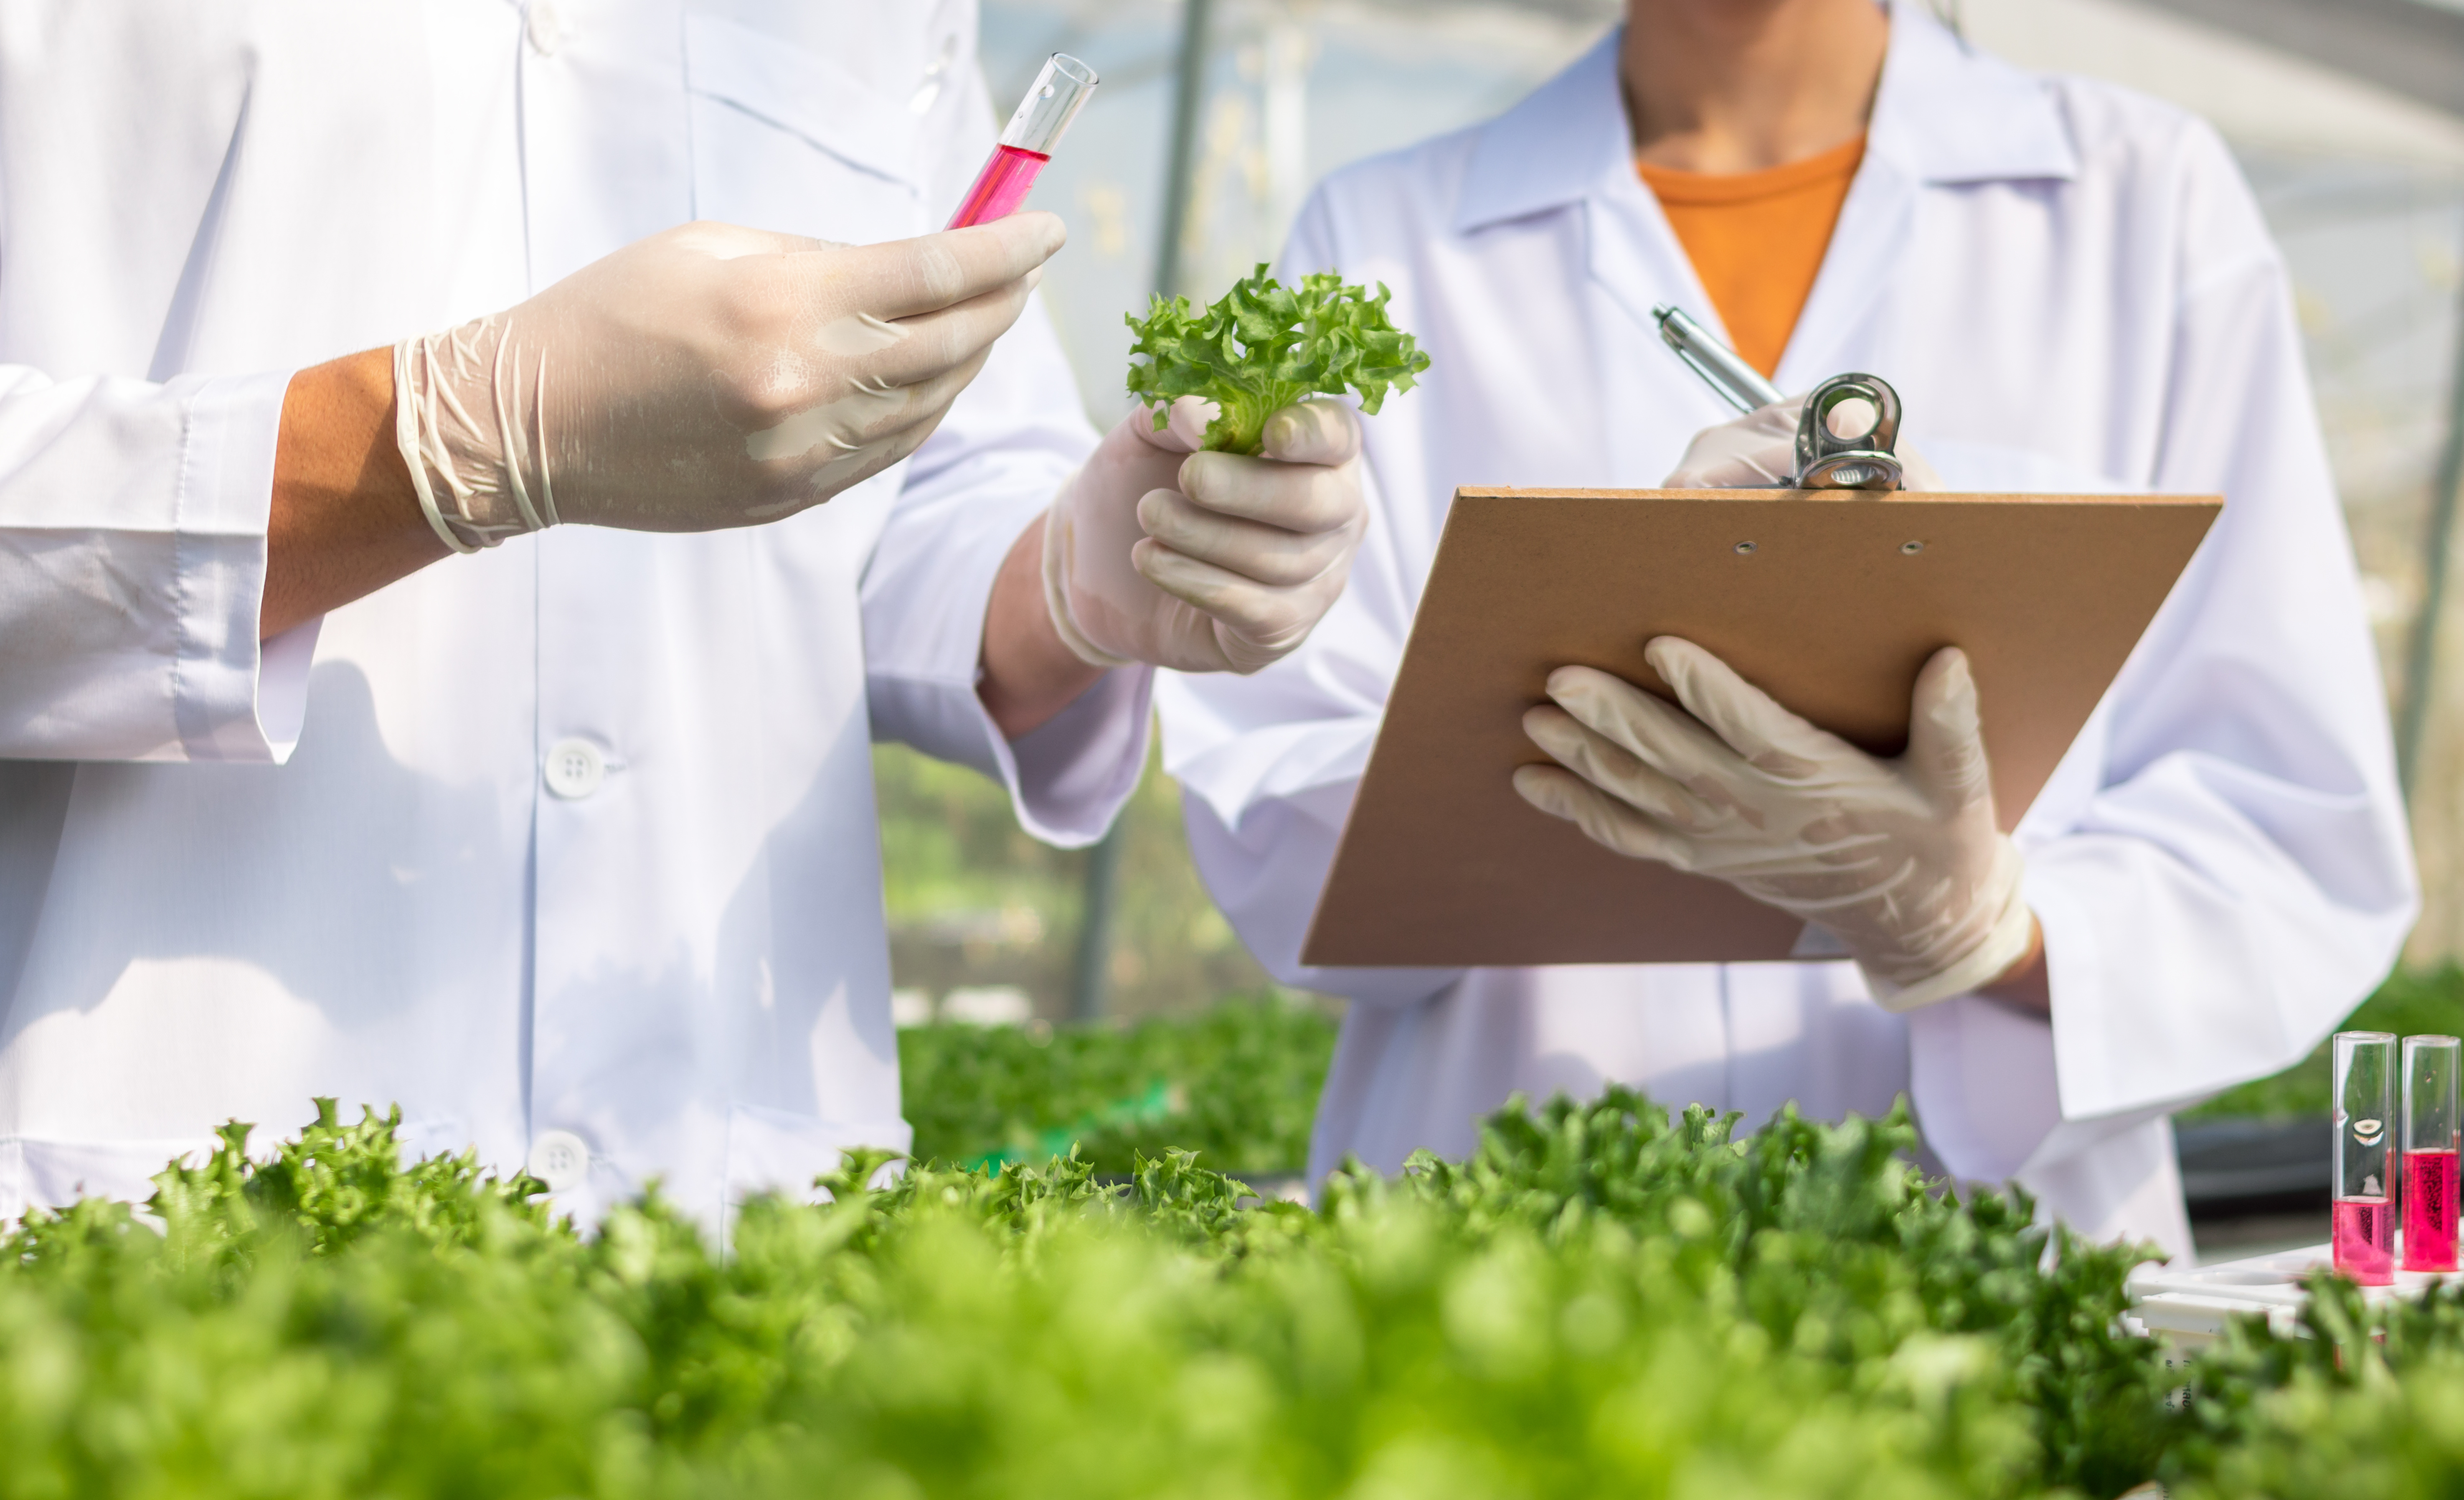 Food scientists examining a plant